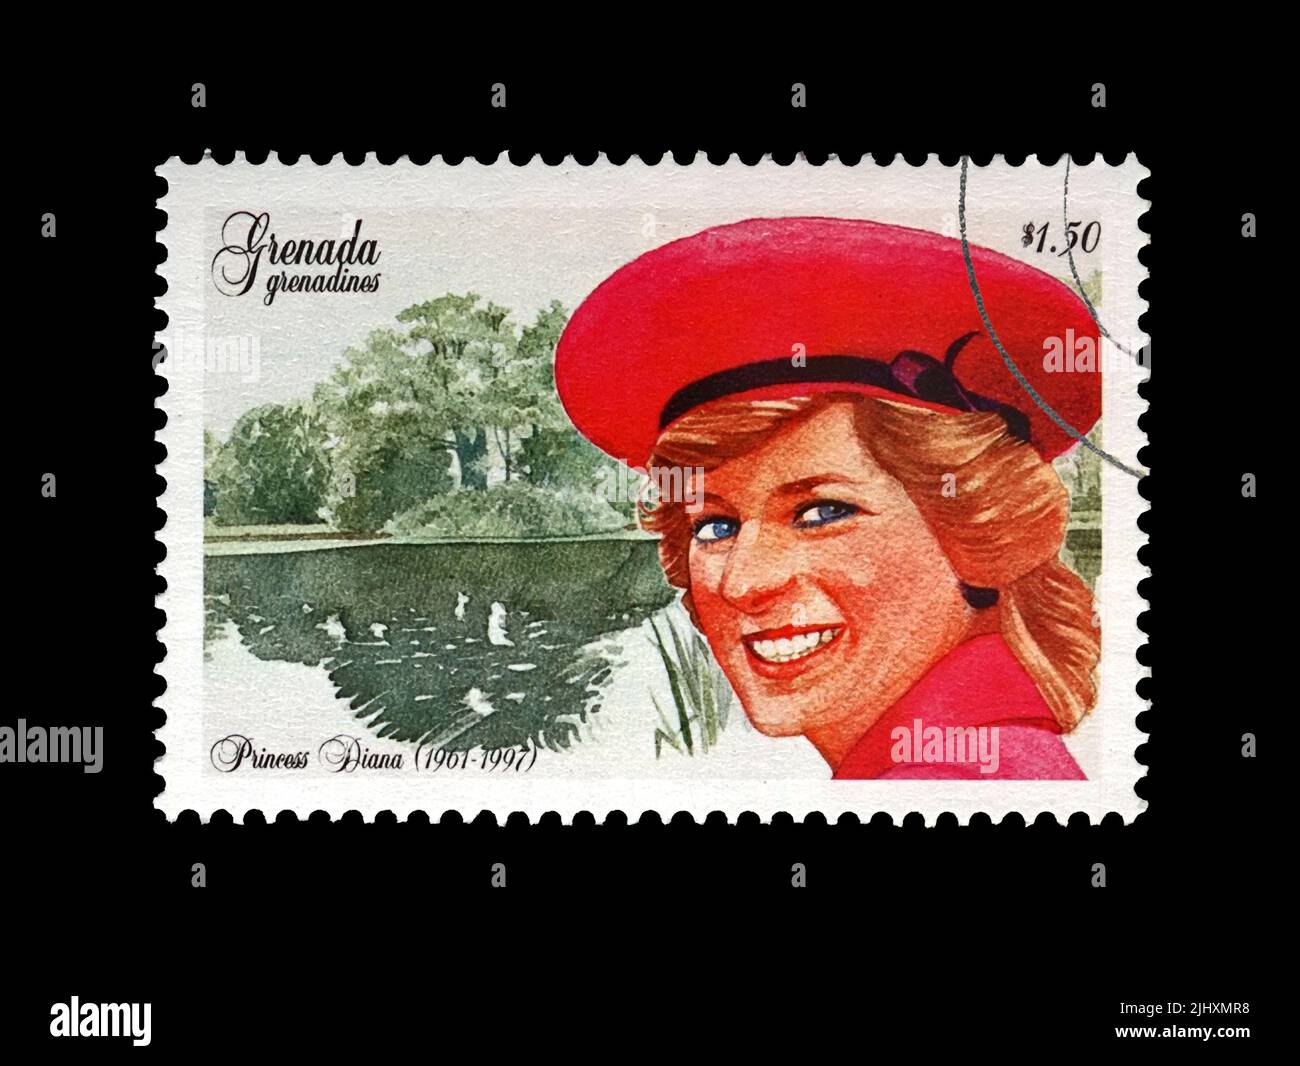 DIANA PRINCESS OF WALES MEMORIAL GB OFFICIAL FIRST DAY COVER KENSINGTON POSTMARK 